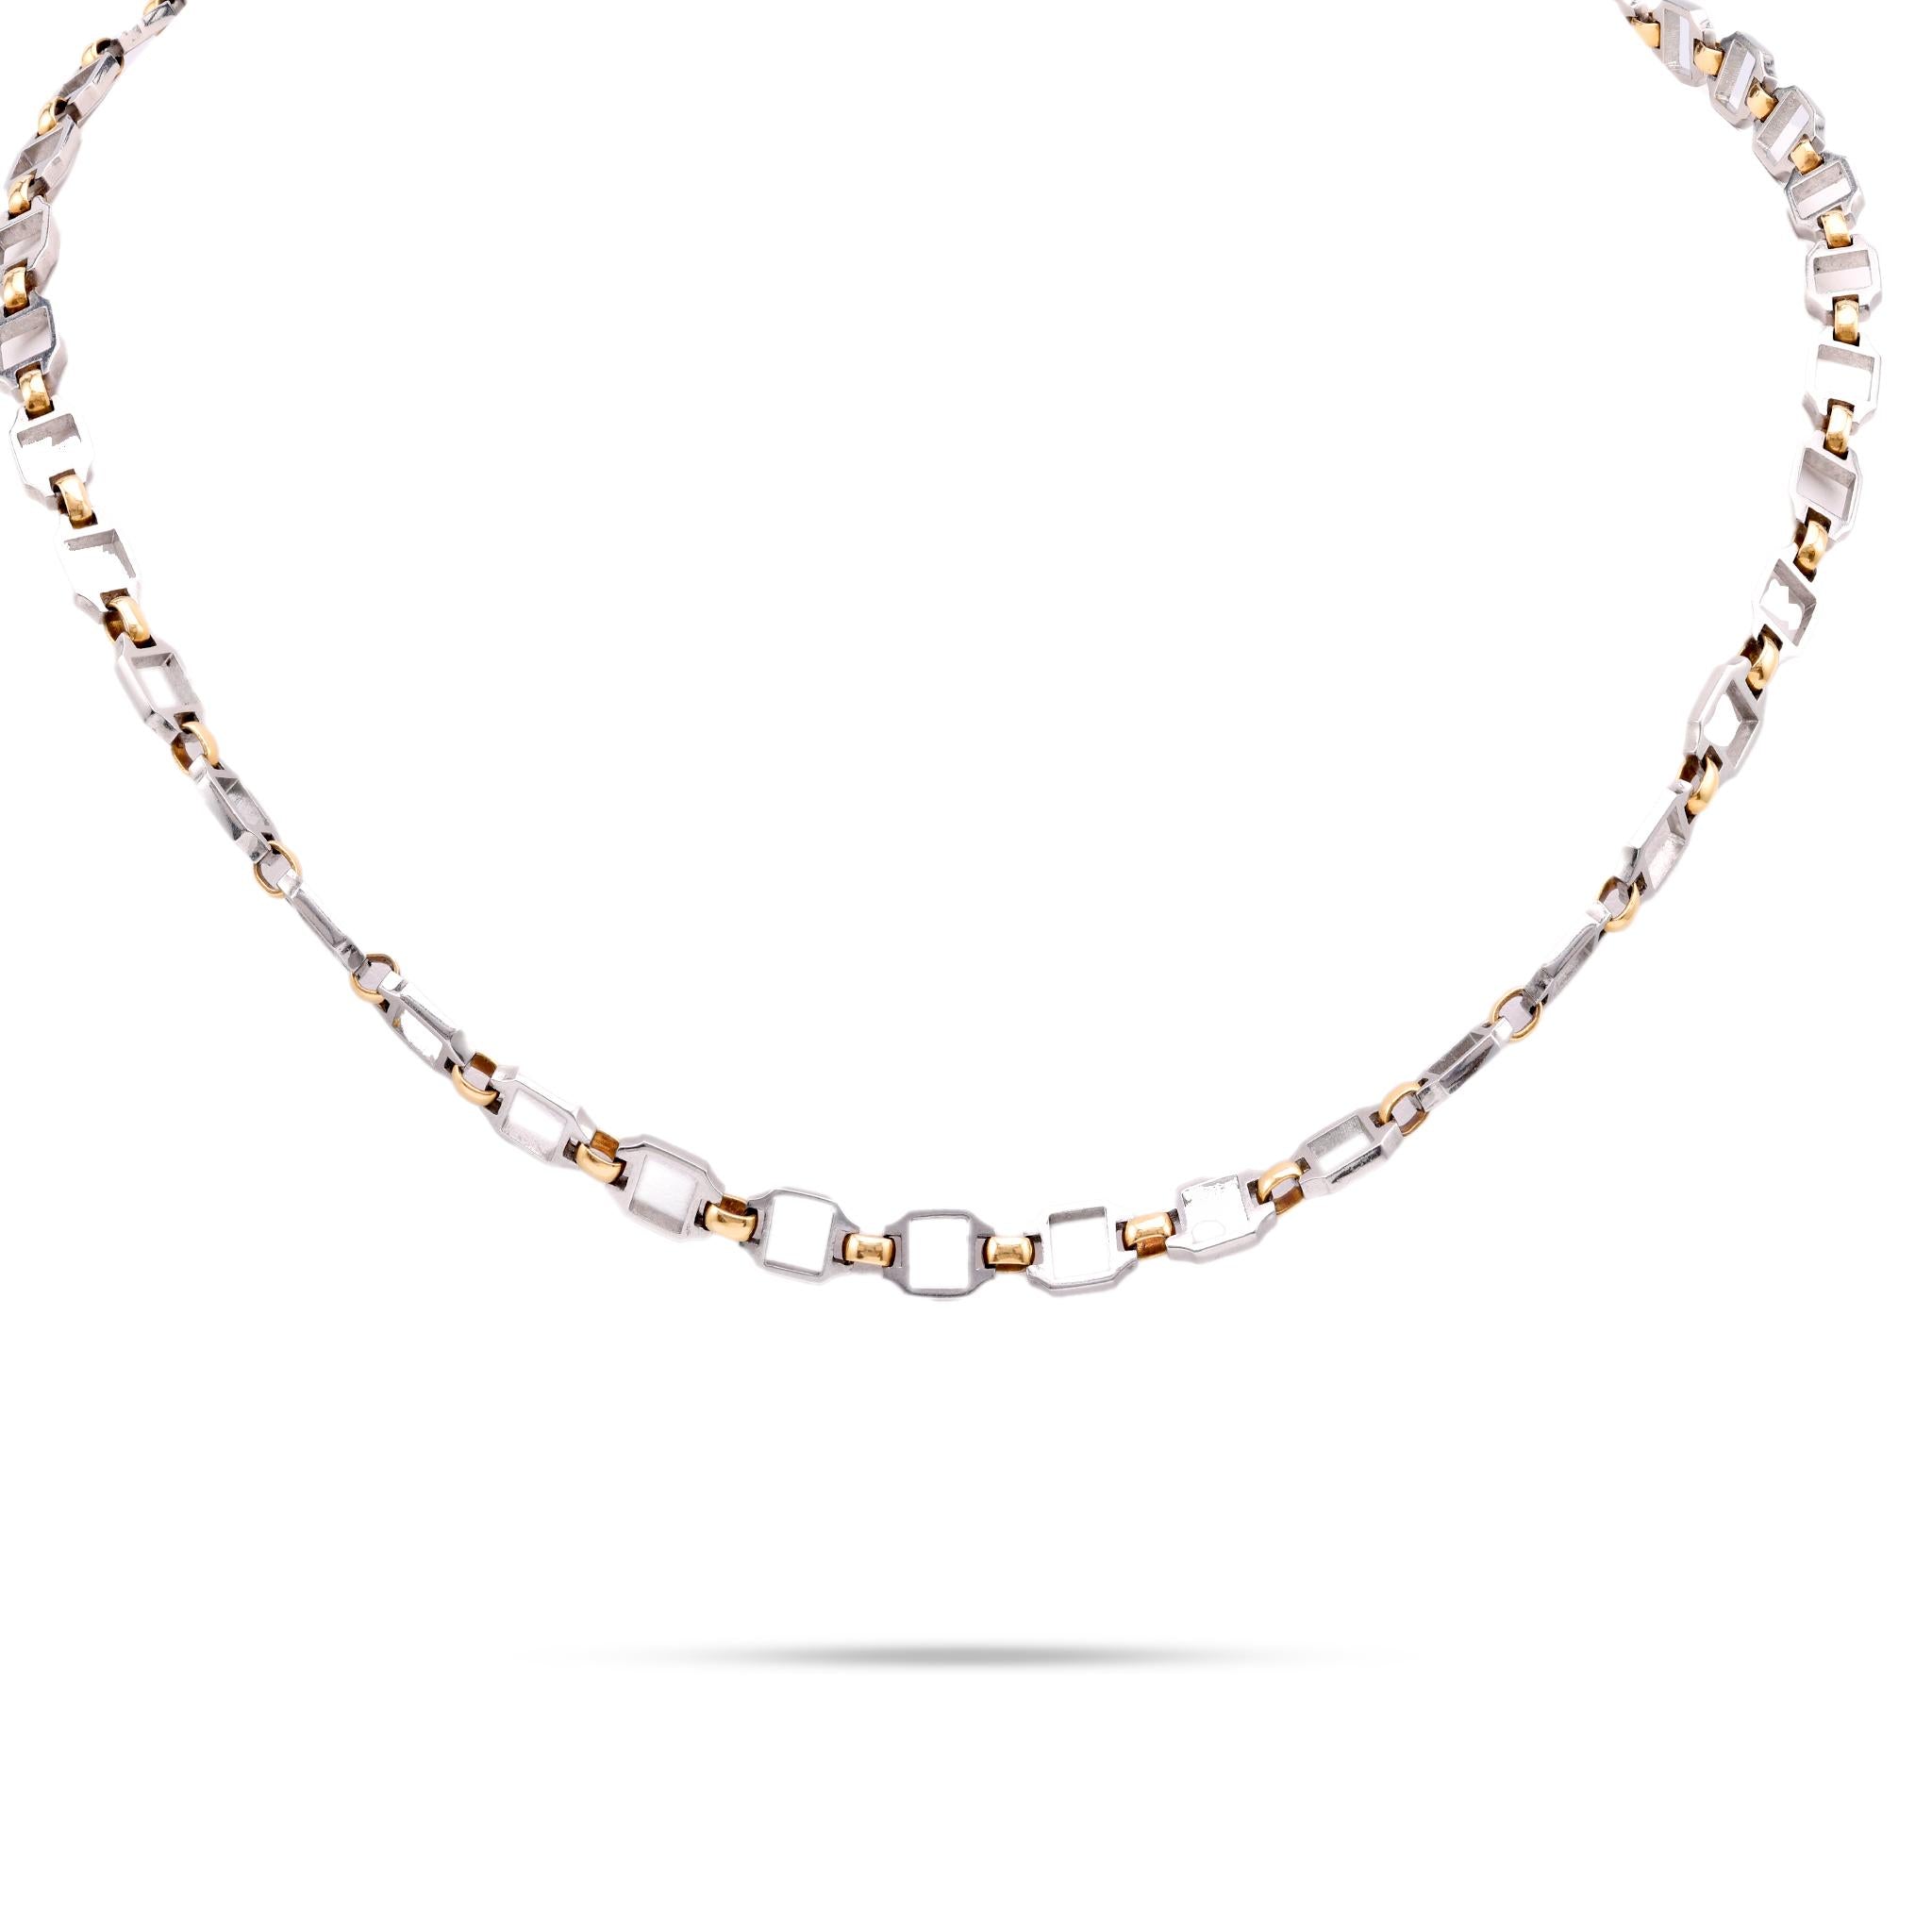 Cartier 18K Yellow Gold and Steel Chain Necklace  Cartier   